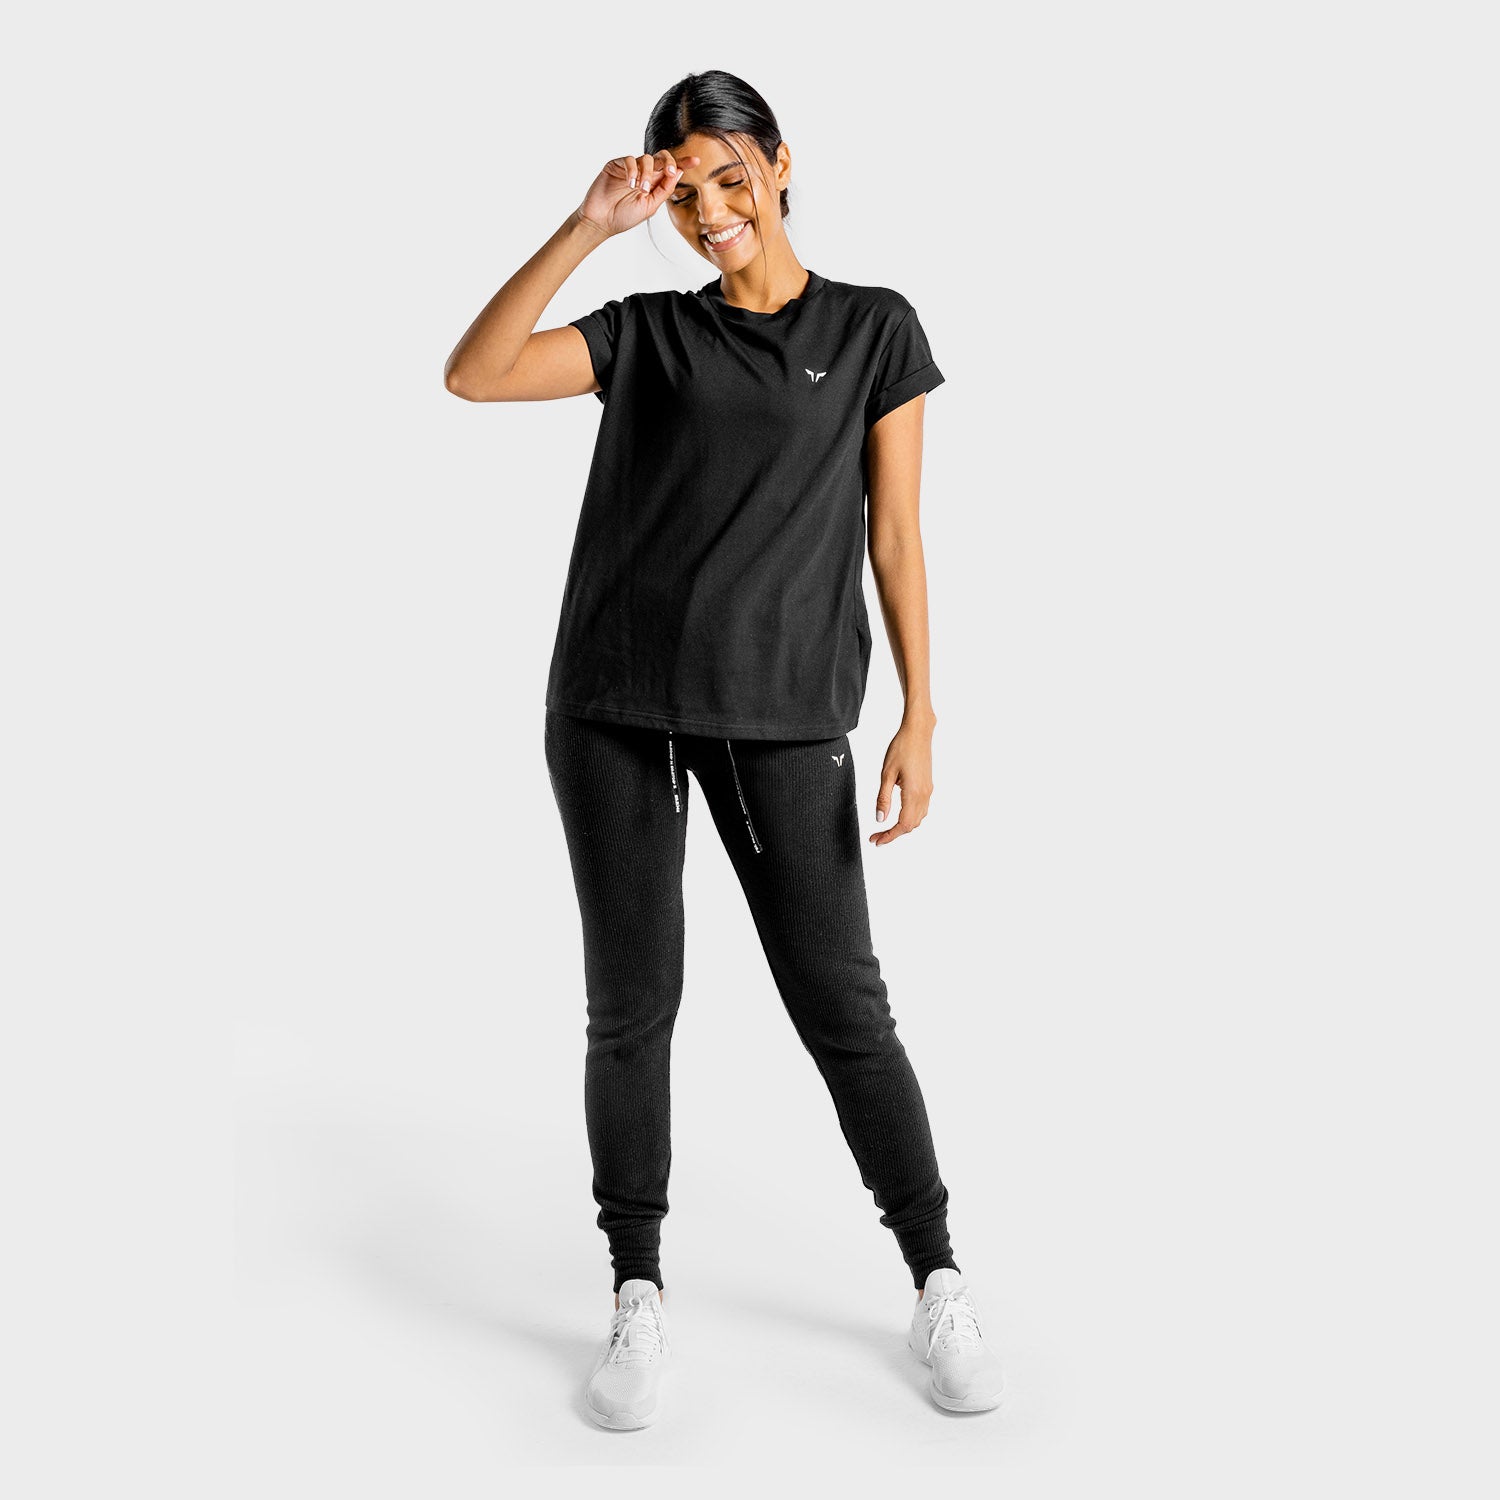 squatwolf-gym-t-shirts-for-women-luxe-oversize-tee-black-workout-clothes